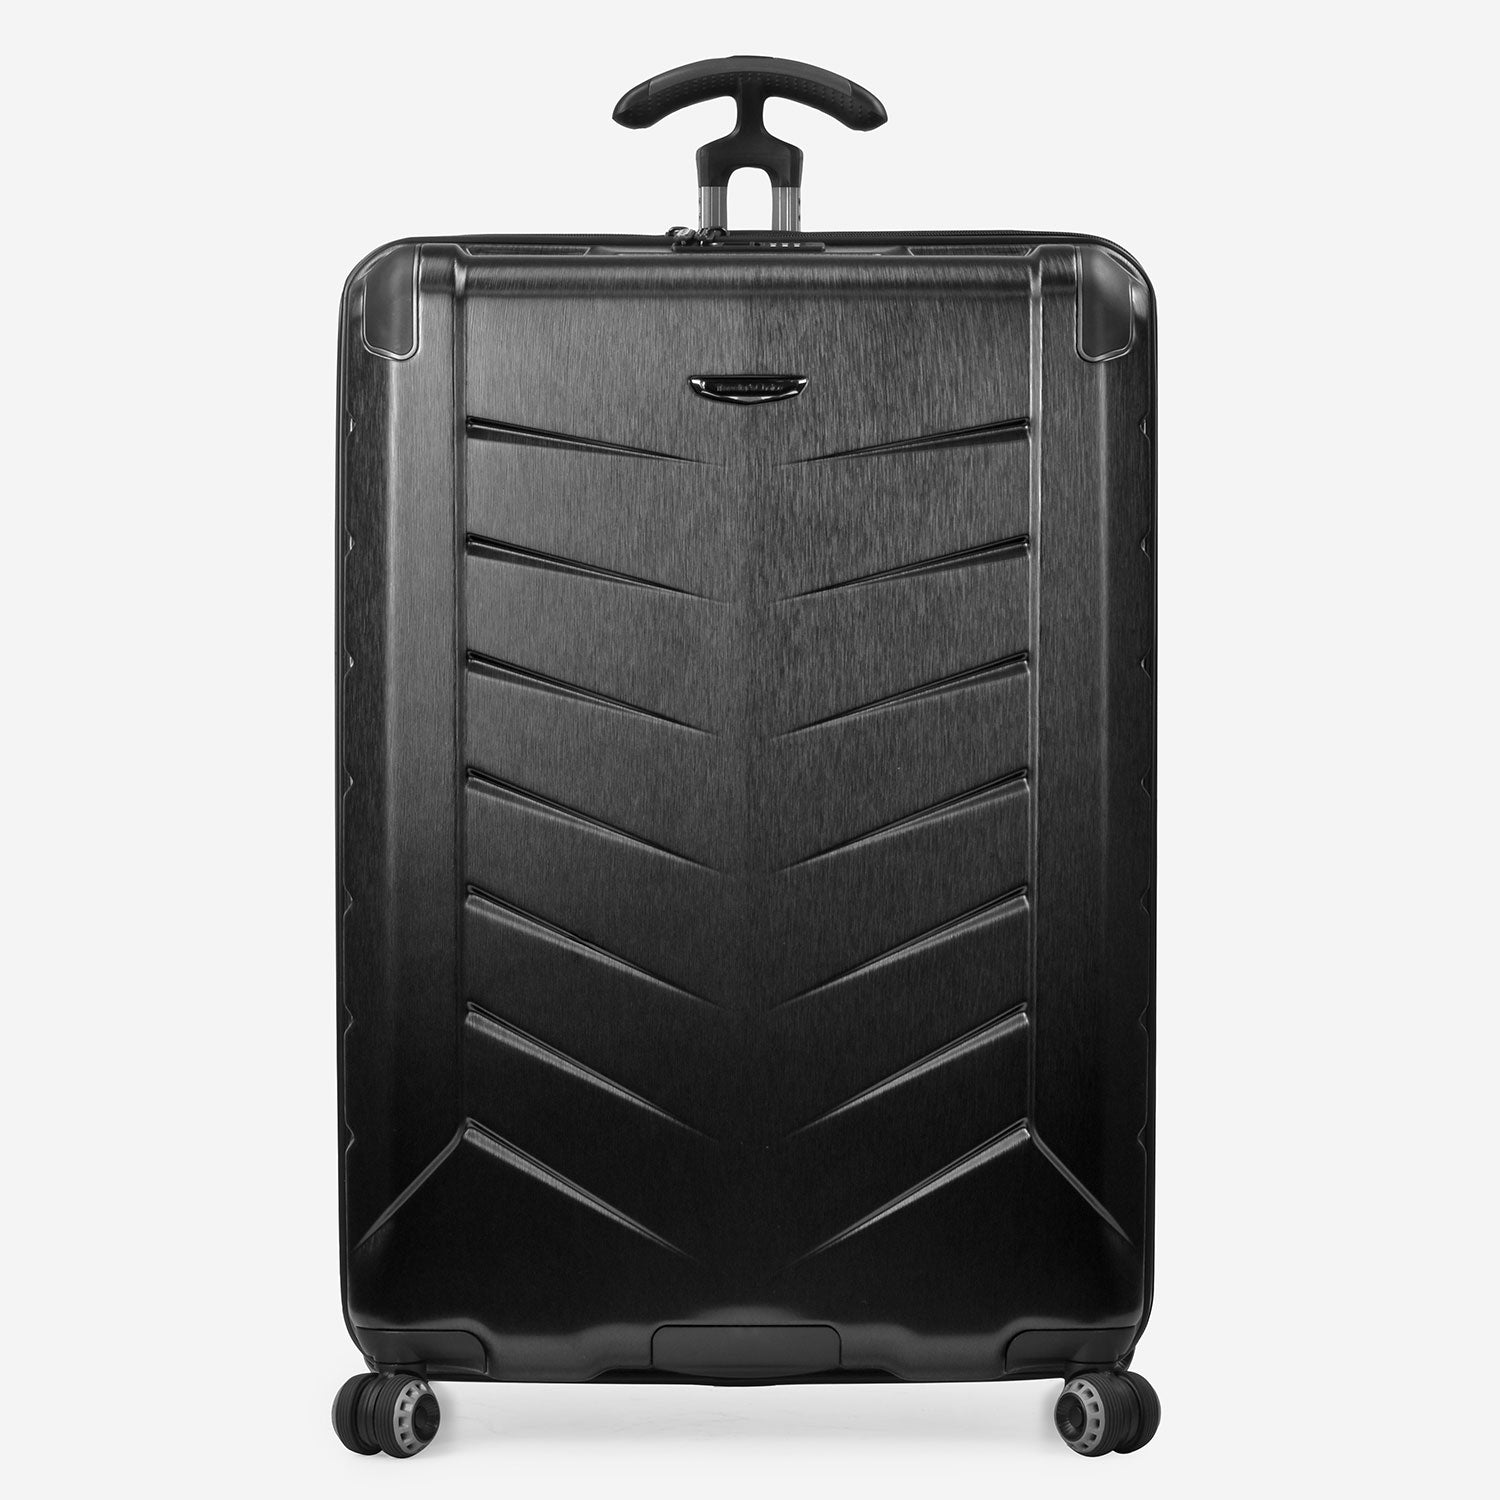 An image of Silverwood II Large Spinner Luggage